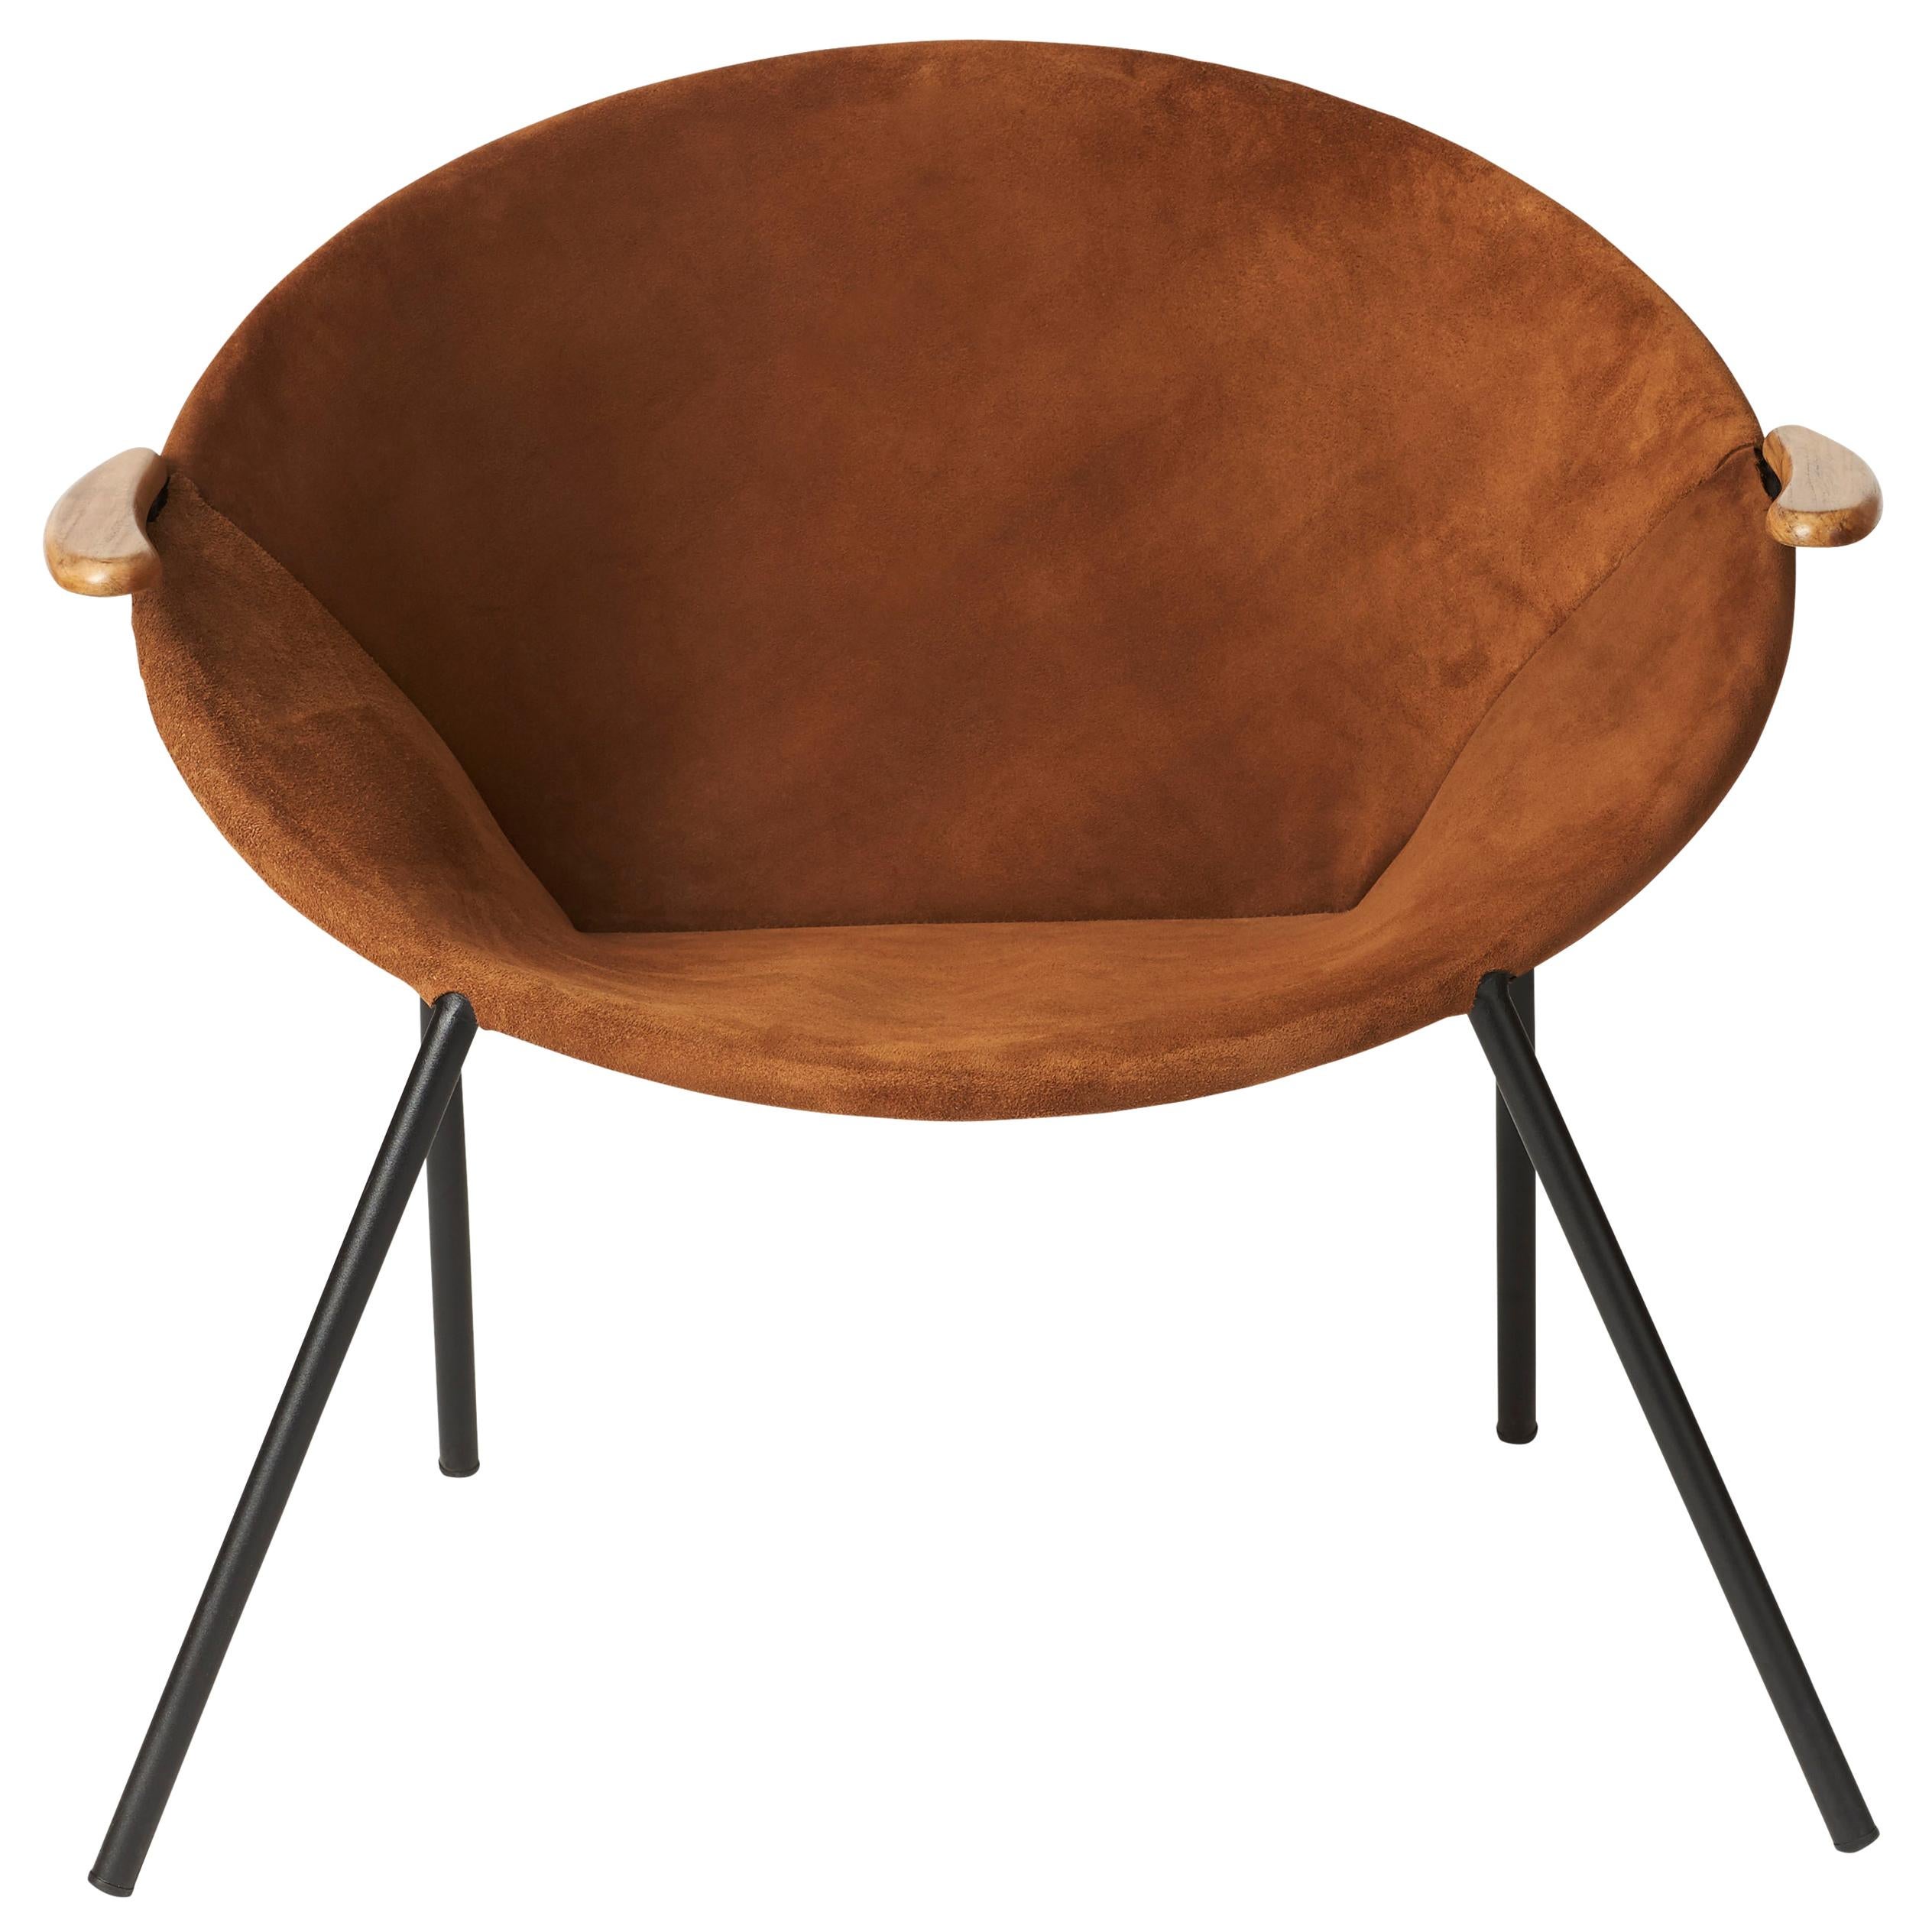 Balloon Lounge Chair in Brown Nubuck Leather by Hans Olsen for Warm Nordic